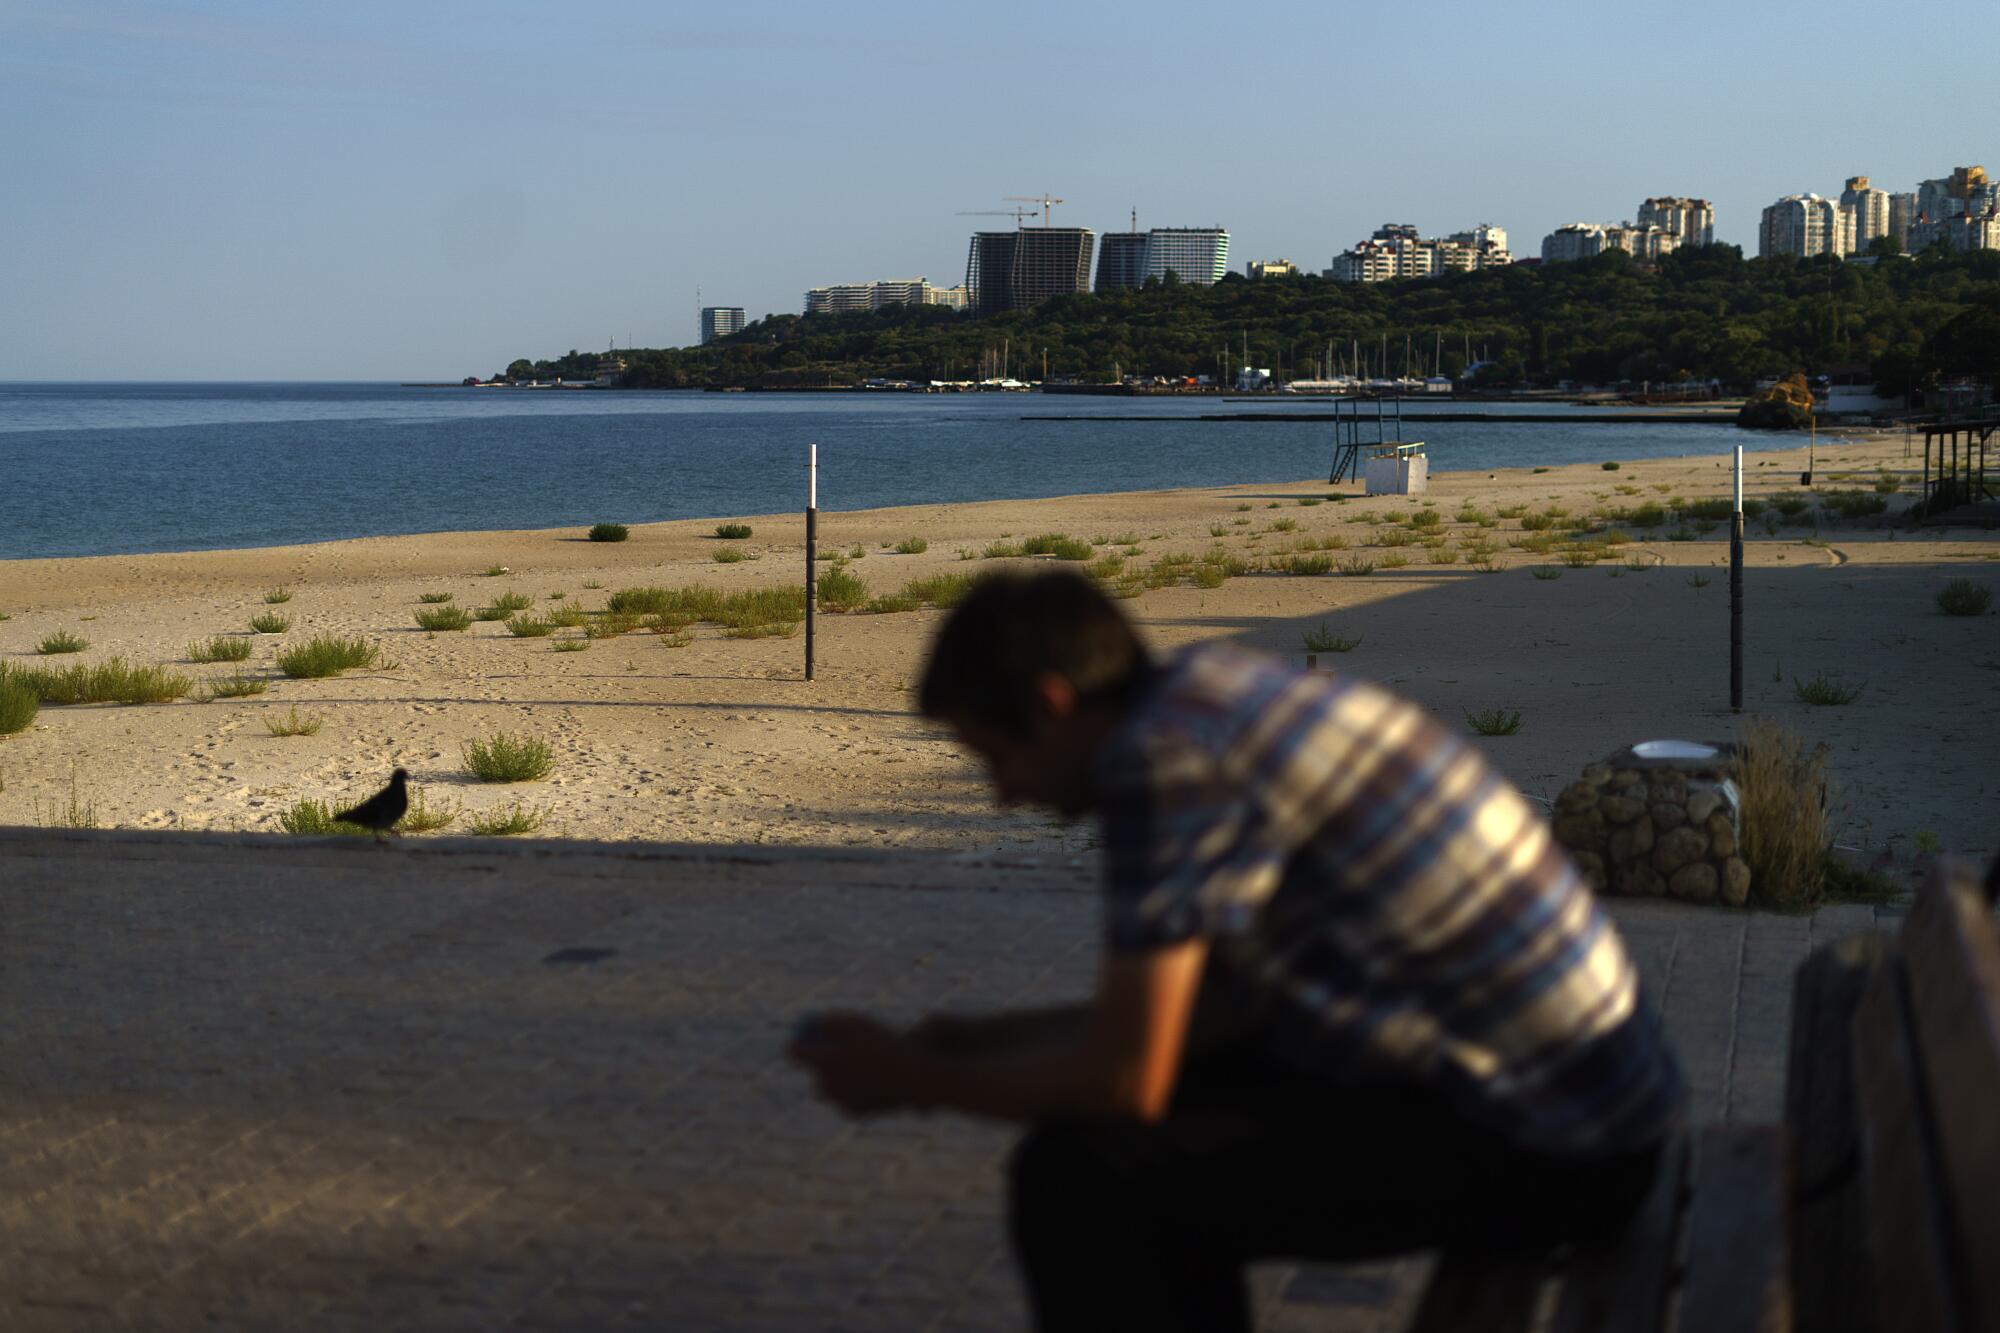 Man sits in front of empty beach.